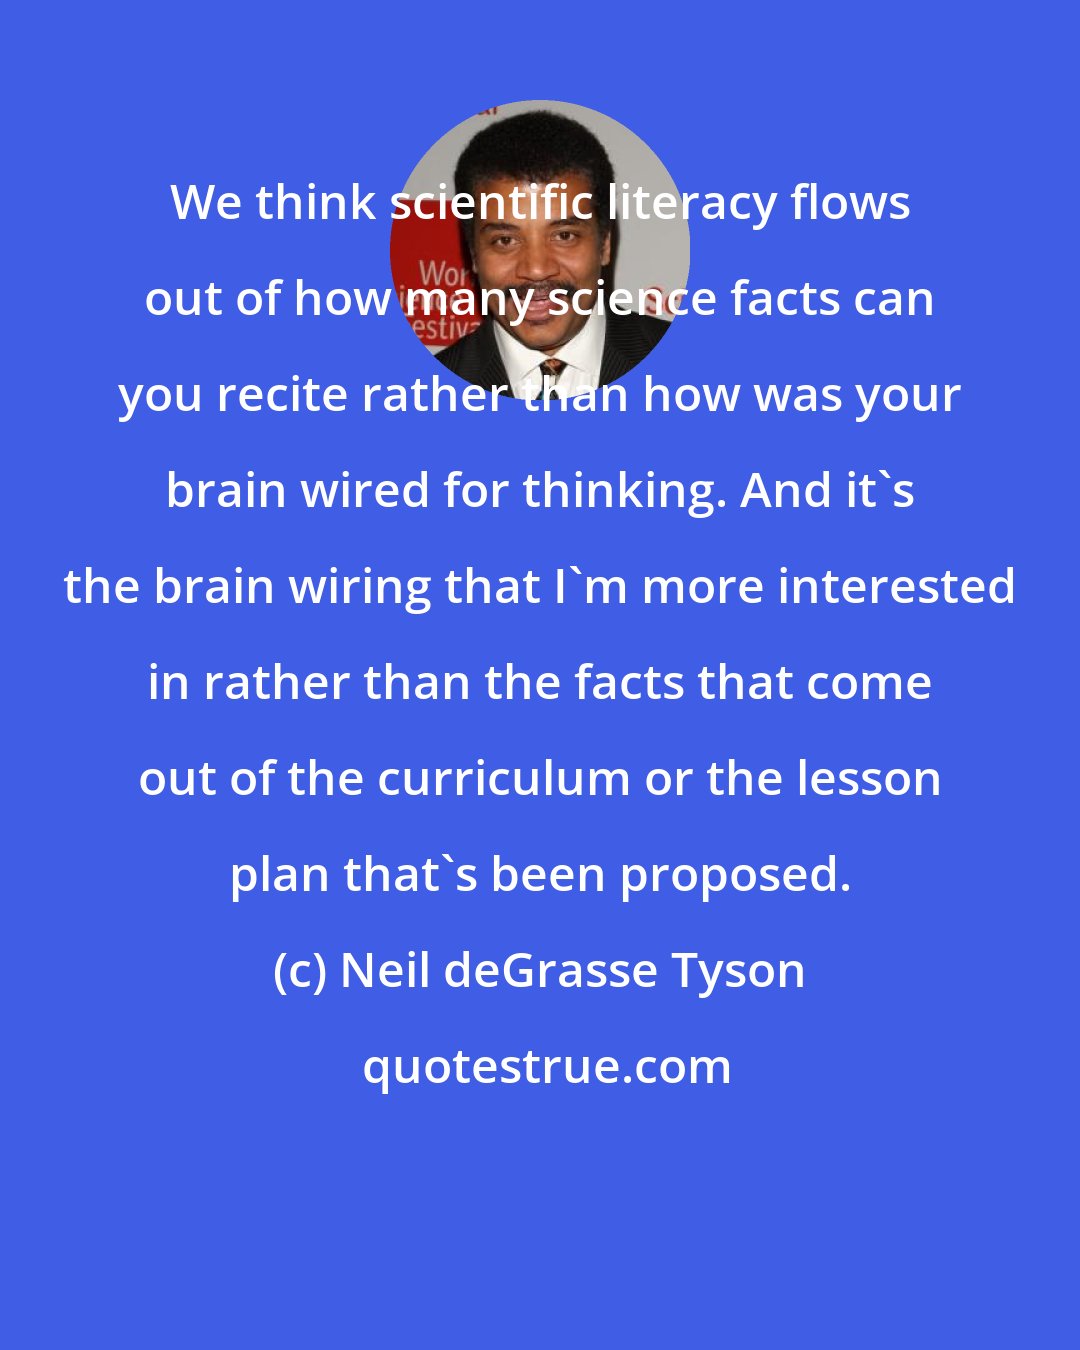 Neil deGrasse Tyson: We think scientific literacy flows out of how many science facts can you recite rather than how was your brain wired for thinking. And it's the brain wiring that I'm more interested in rather than the facts that come out of the curriculum or the lesson plan that's been proposed.